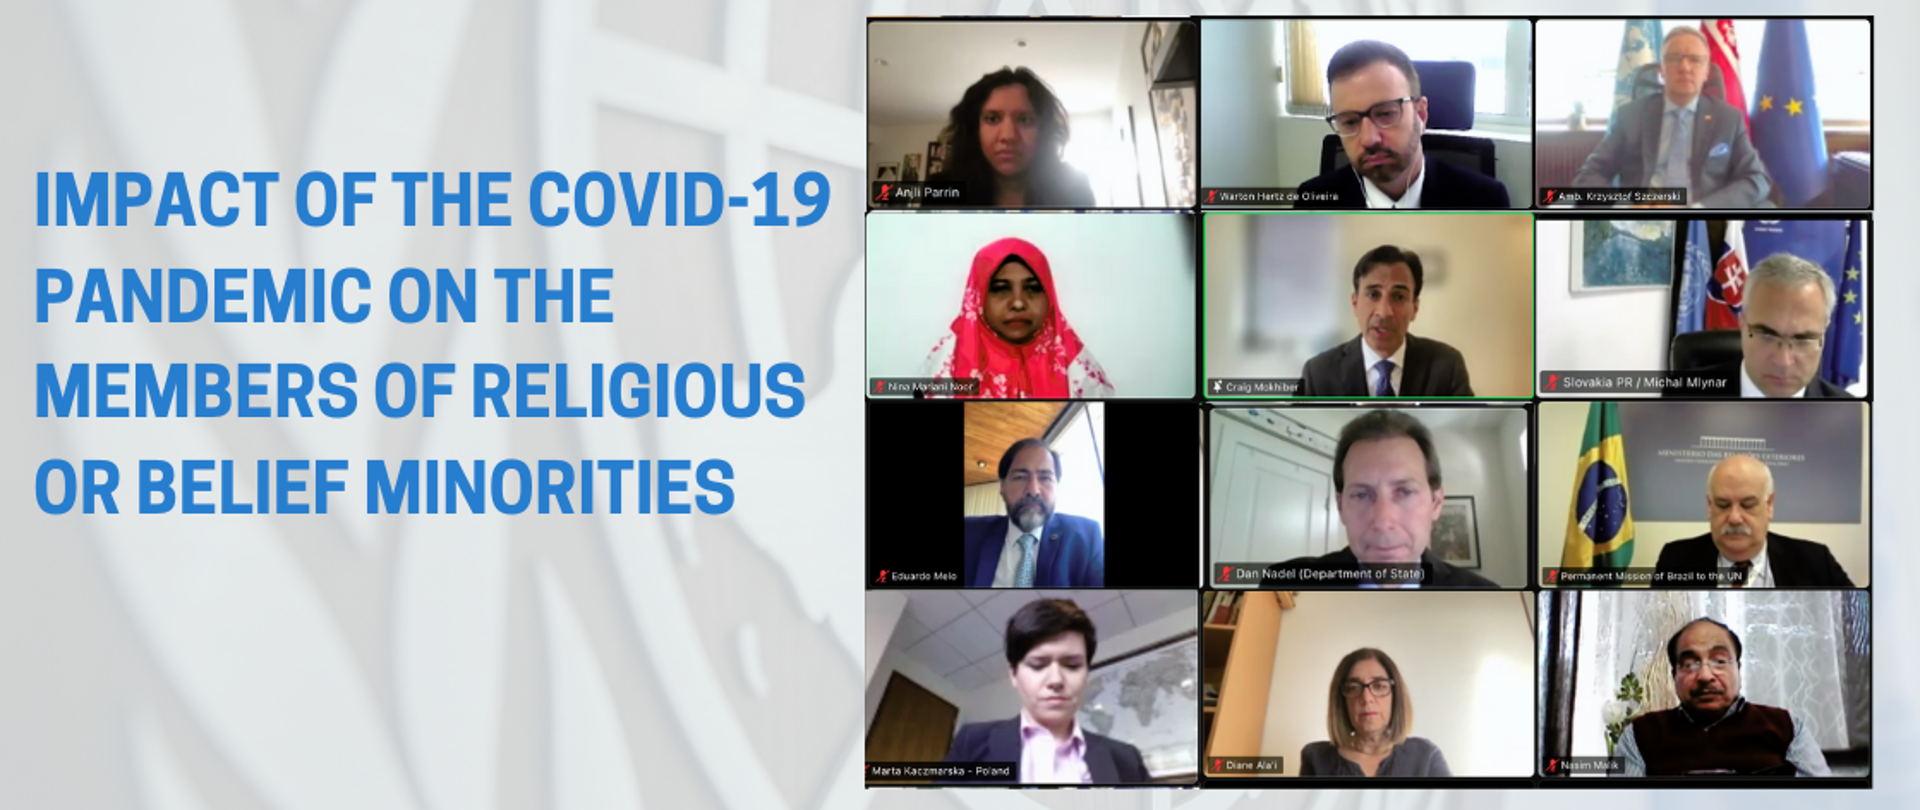 Virtual event on the impact of the COVID-19 pandemic on the members of religious or belief minorities